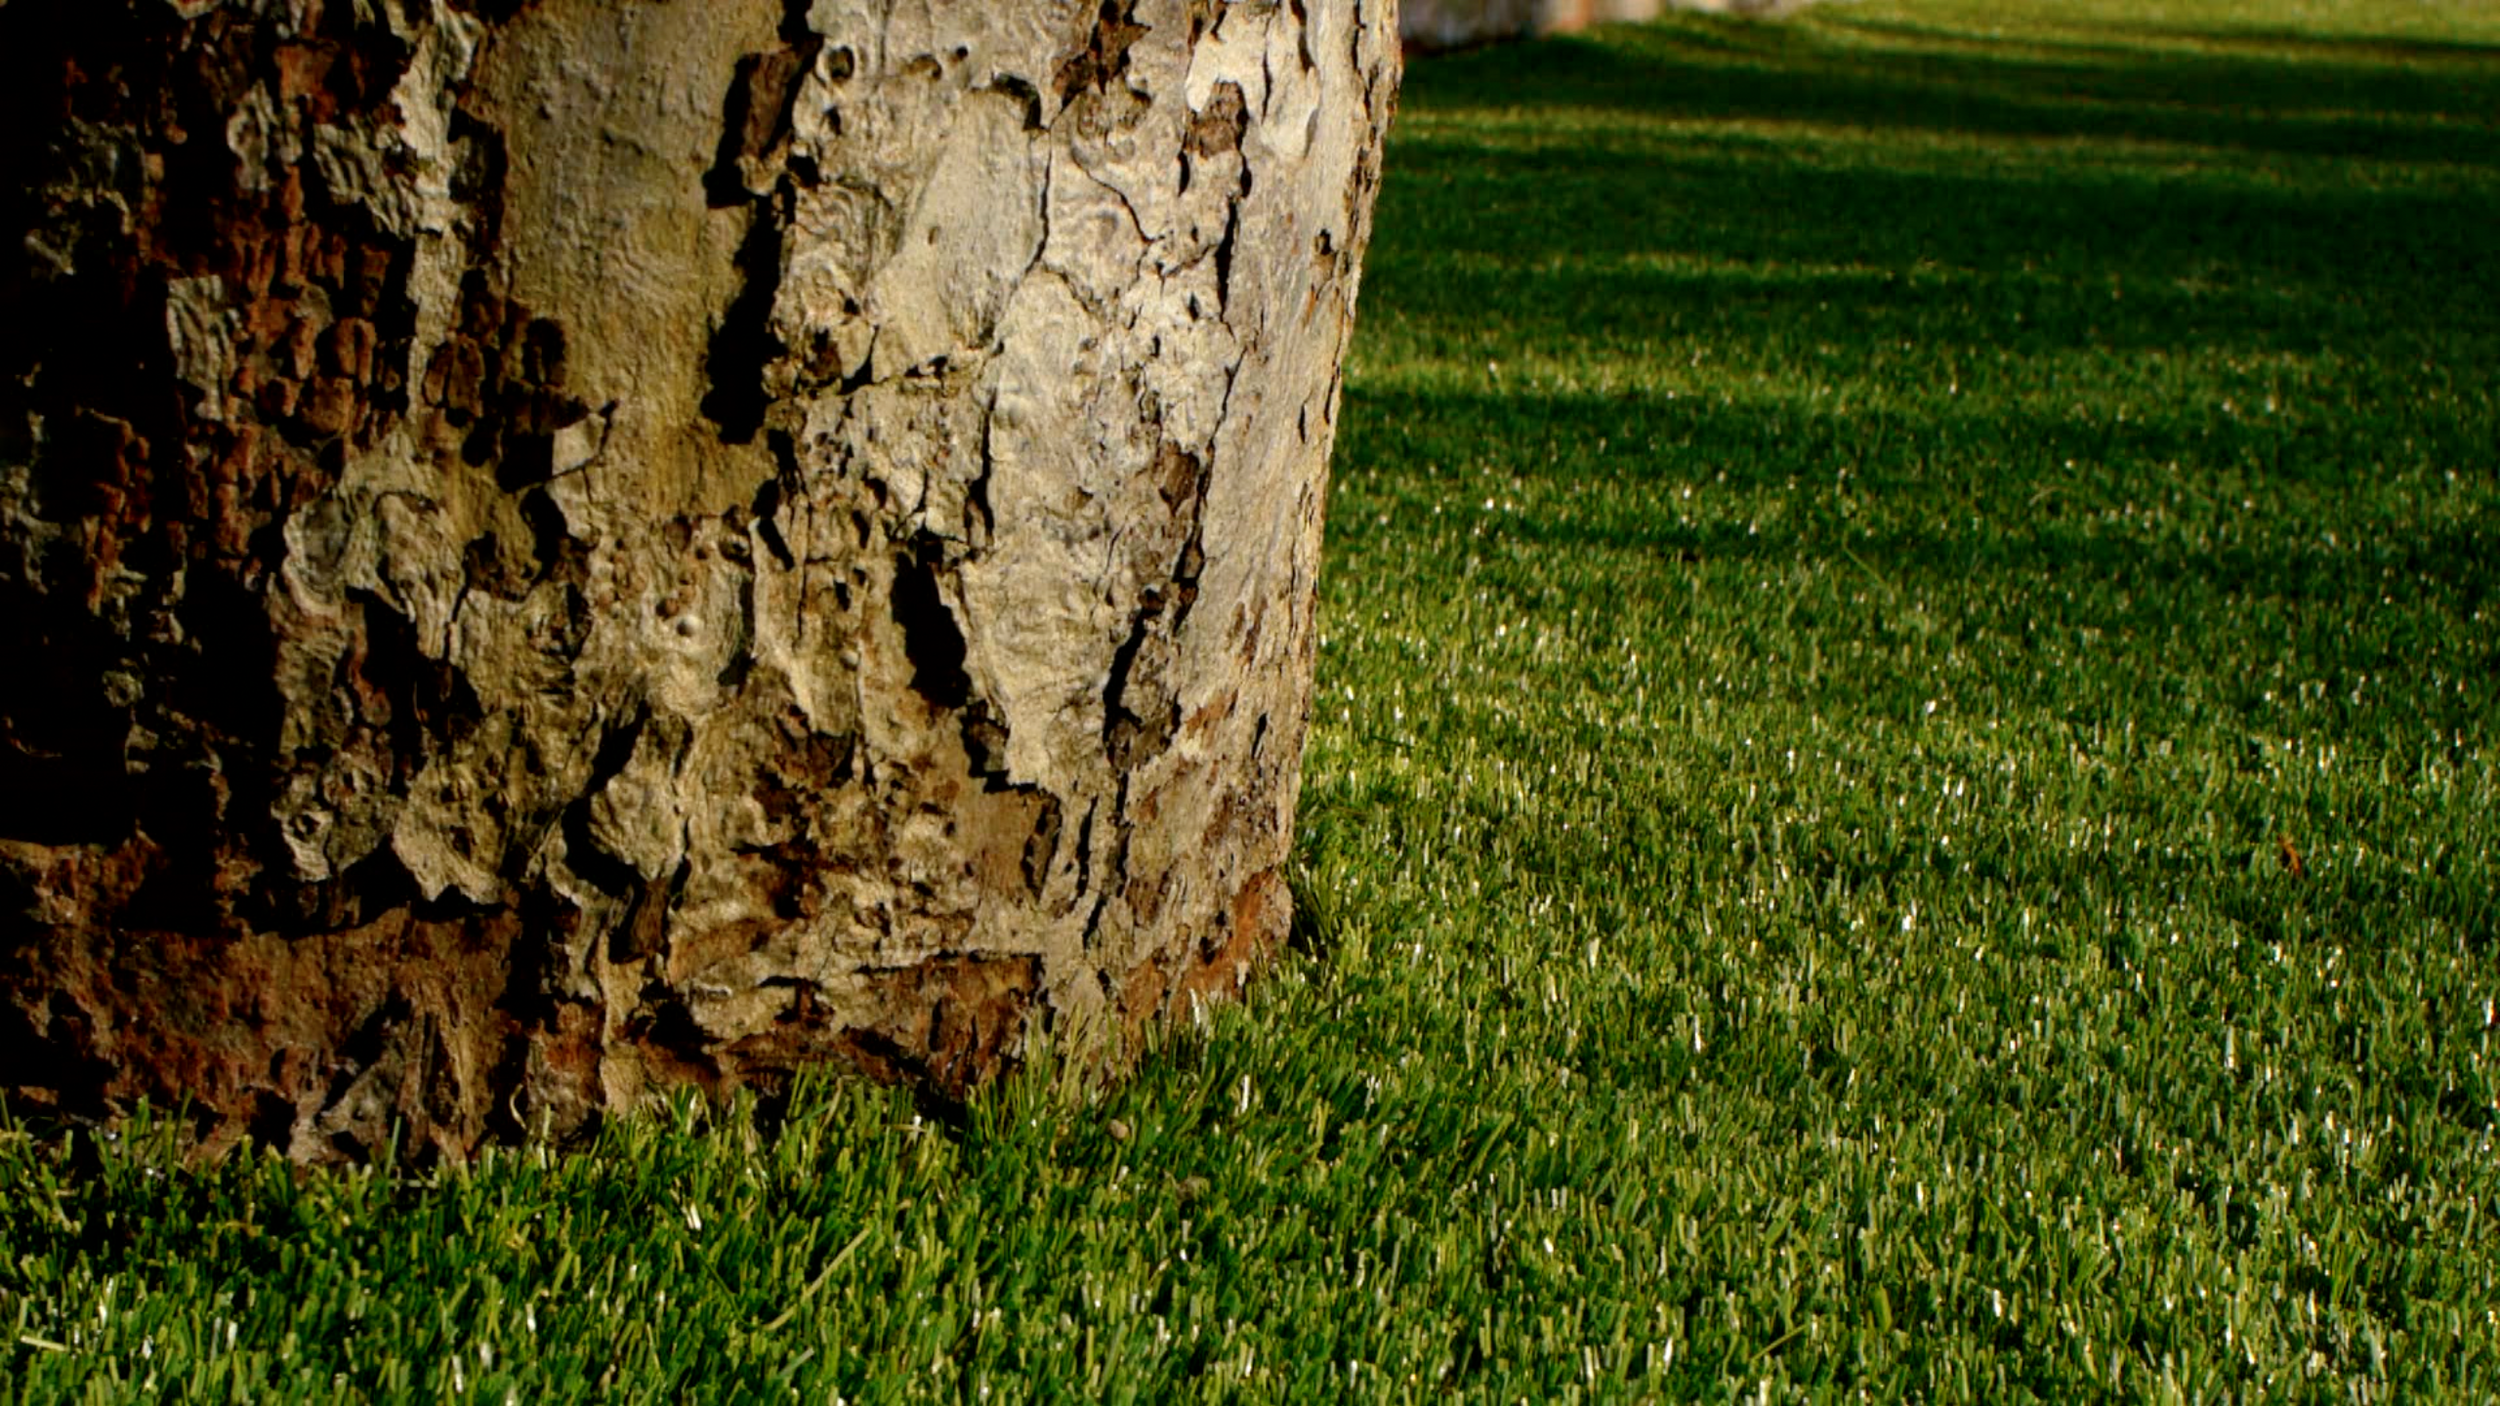 close up of tree and lawn